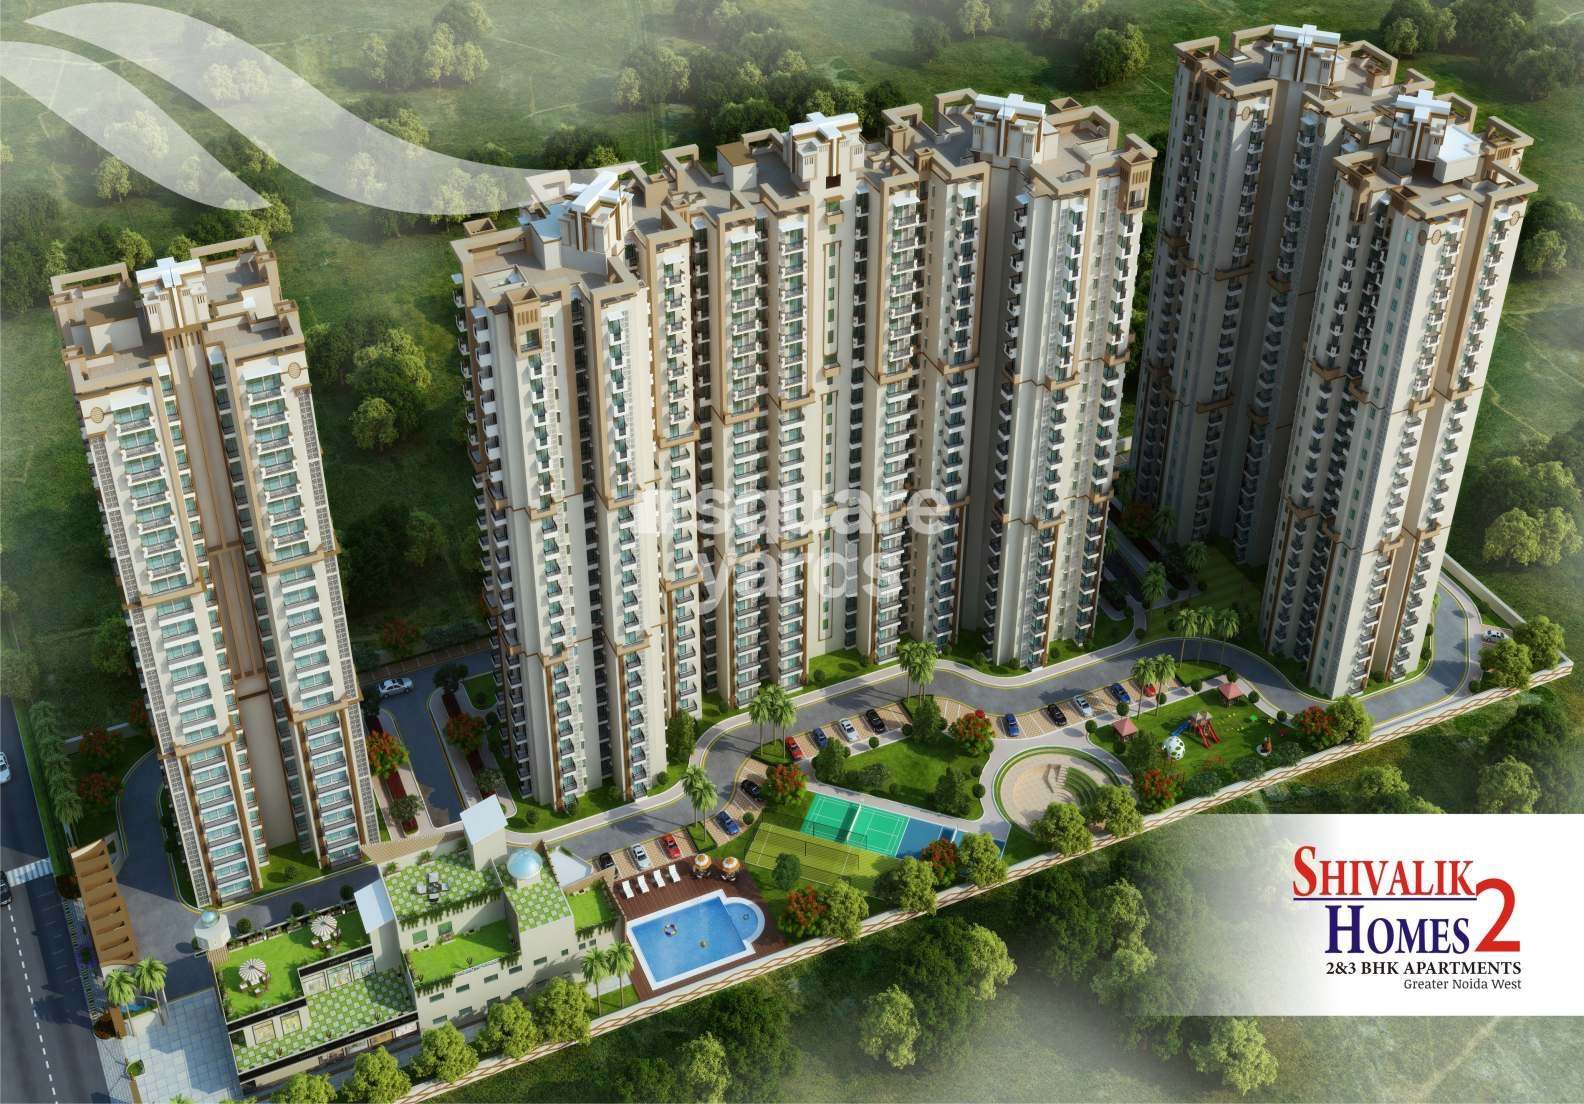 cosmos shivalik homes 2 project tower view1 5731